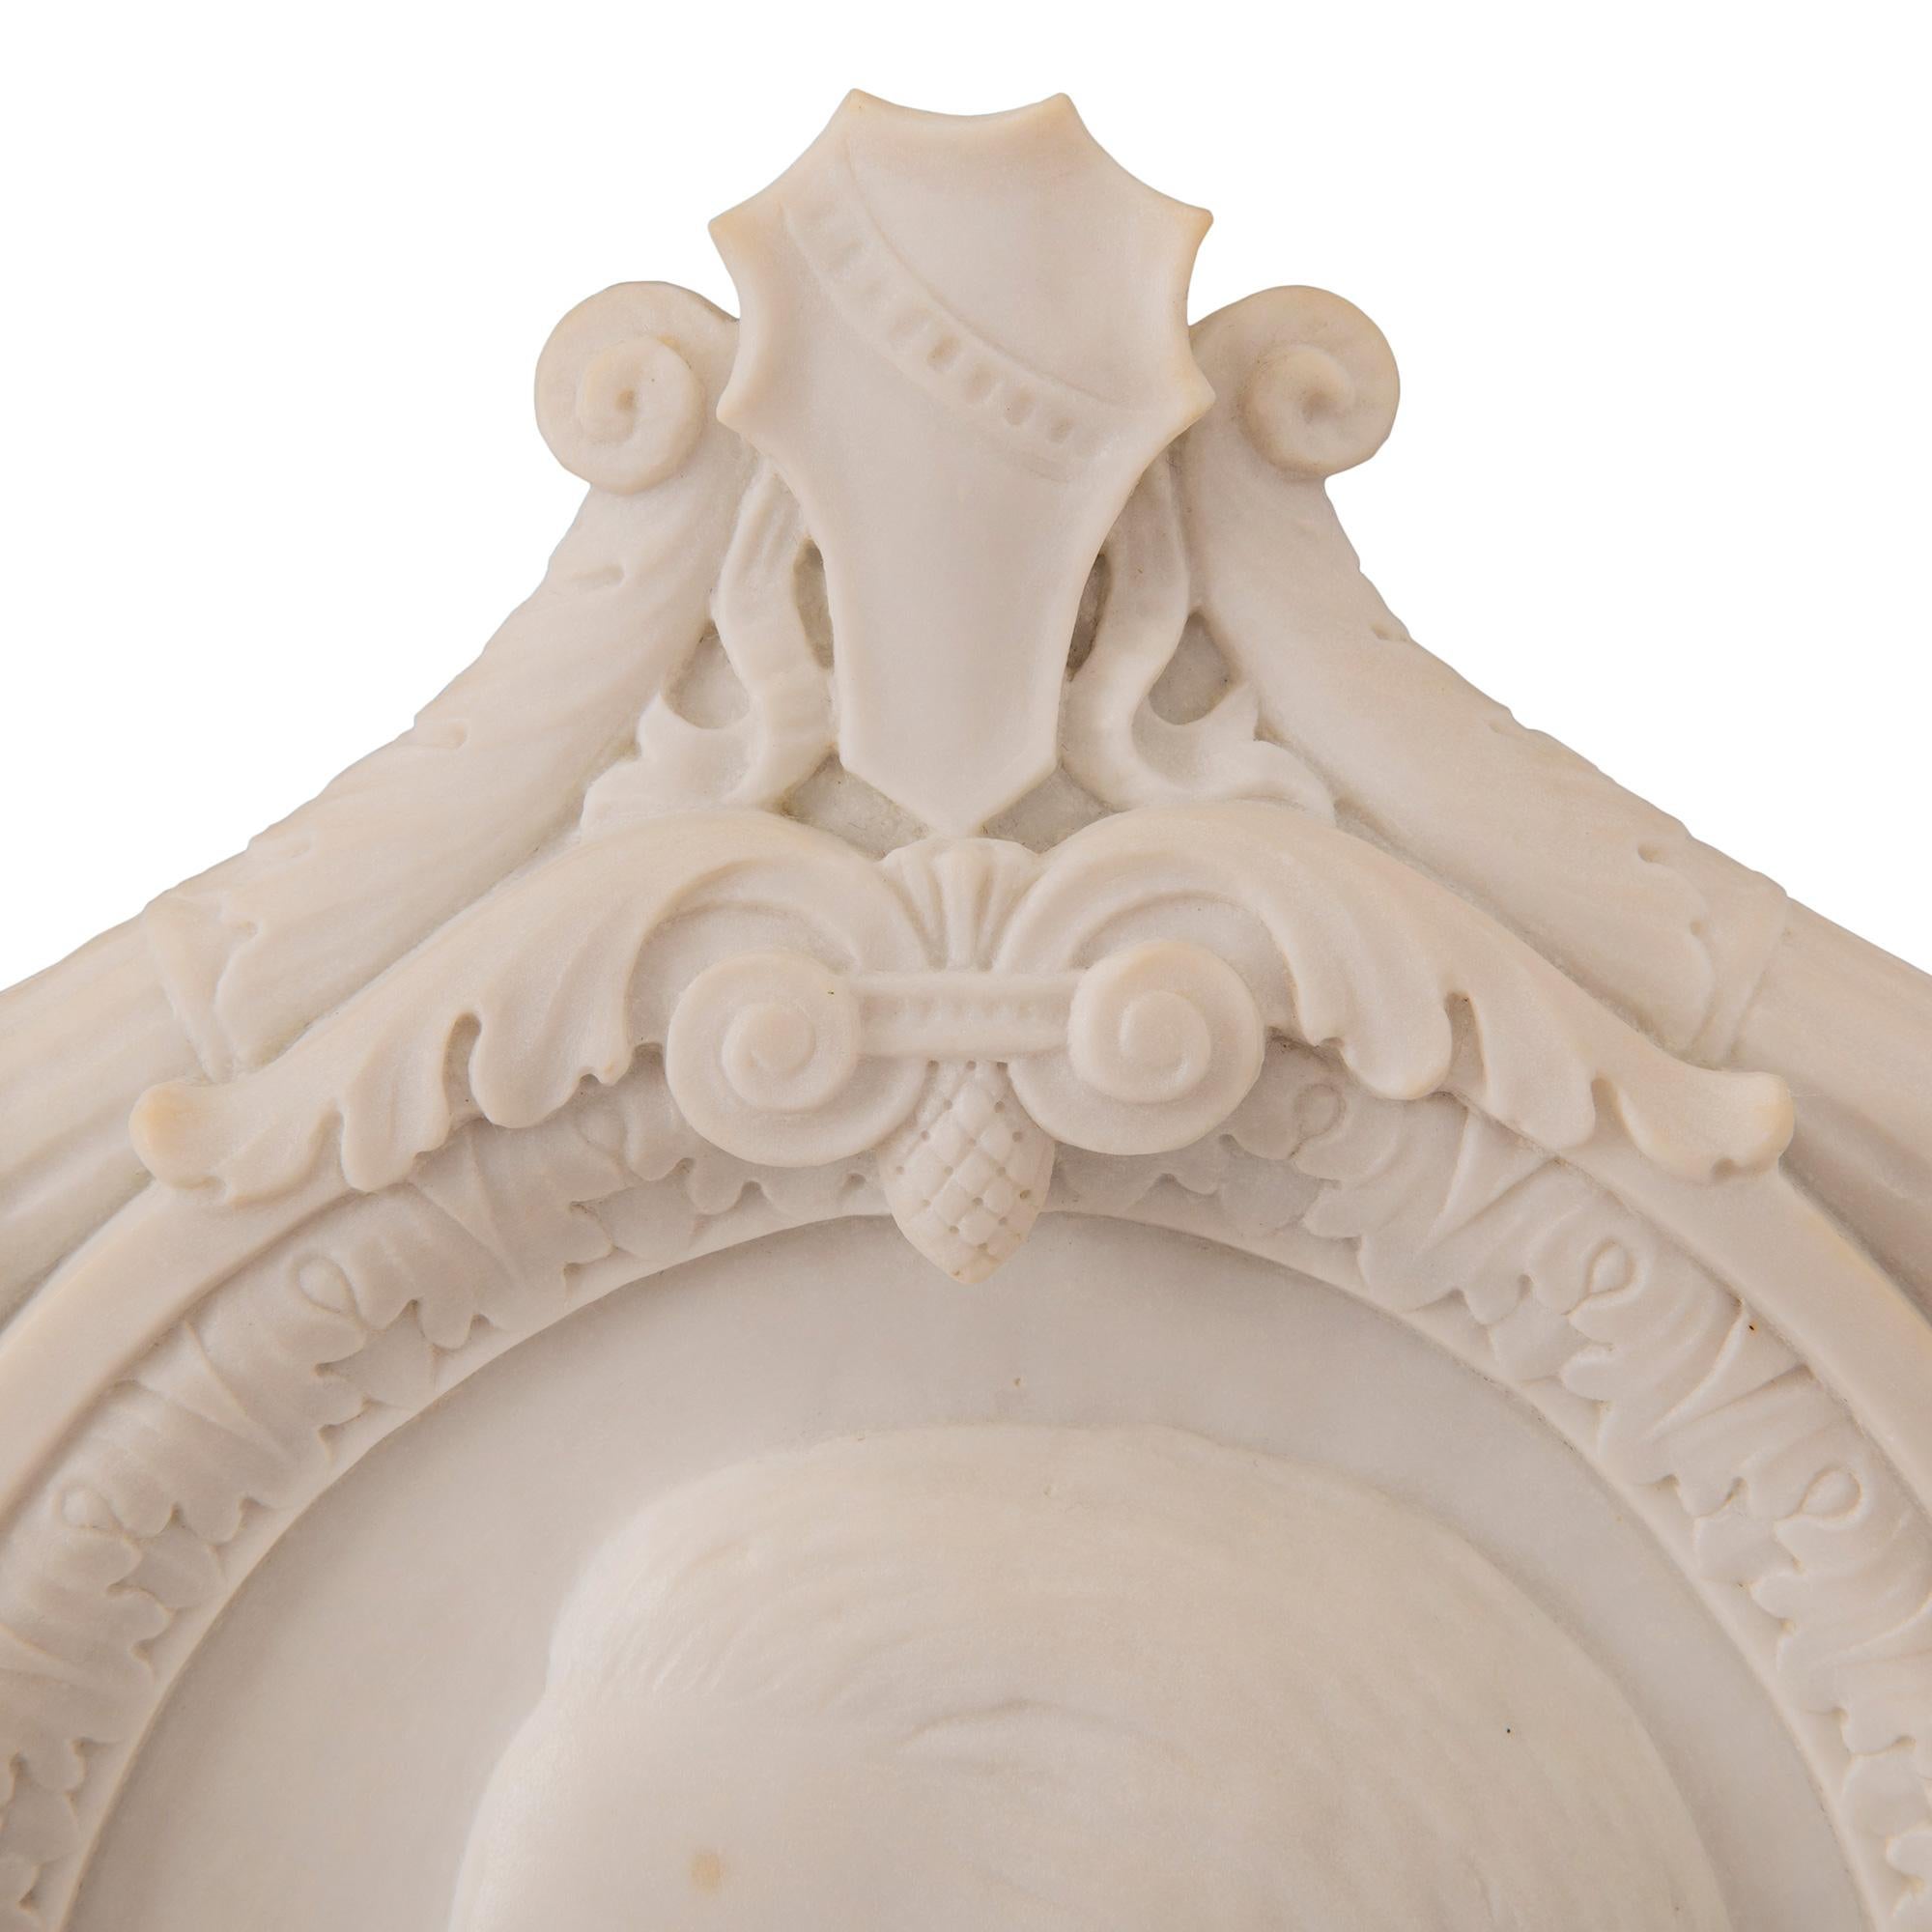 Italian 19th Century Louis XVI Style Carrara and Griotte Marble Plaque For Sale 2